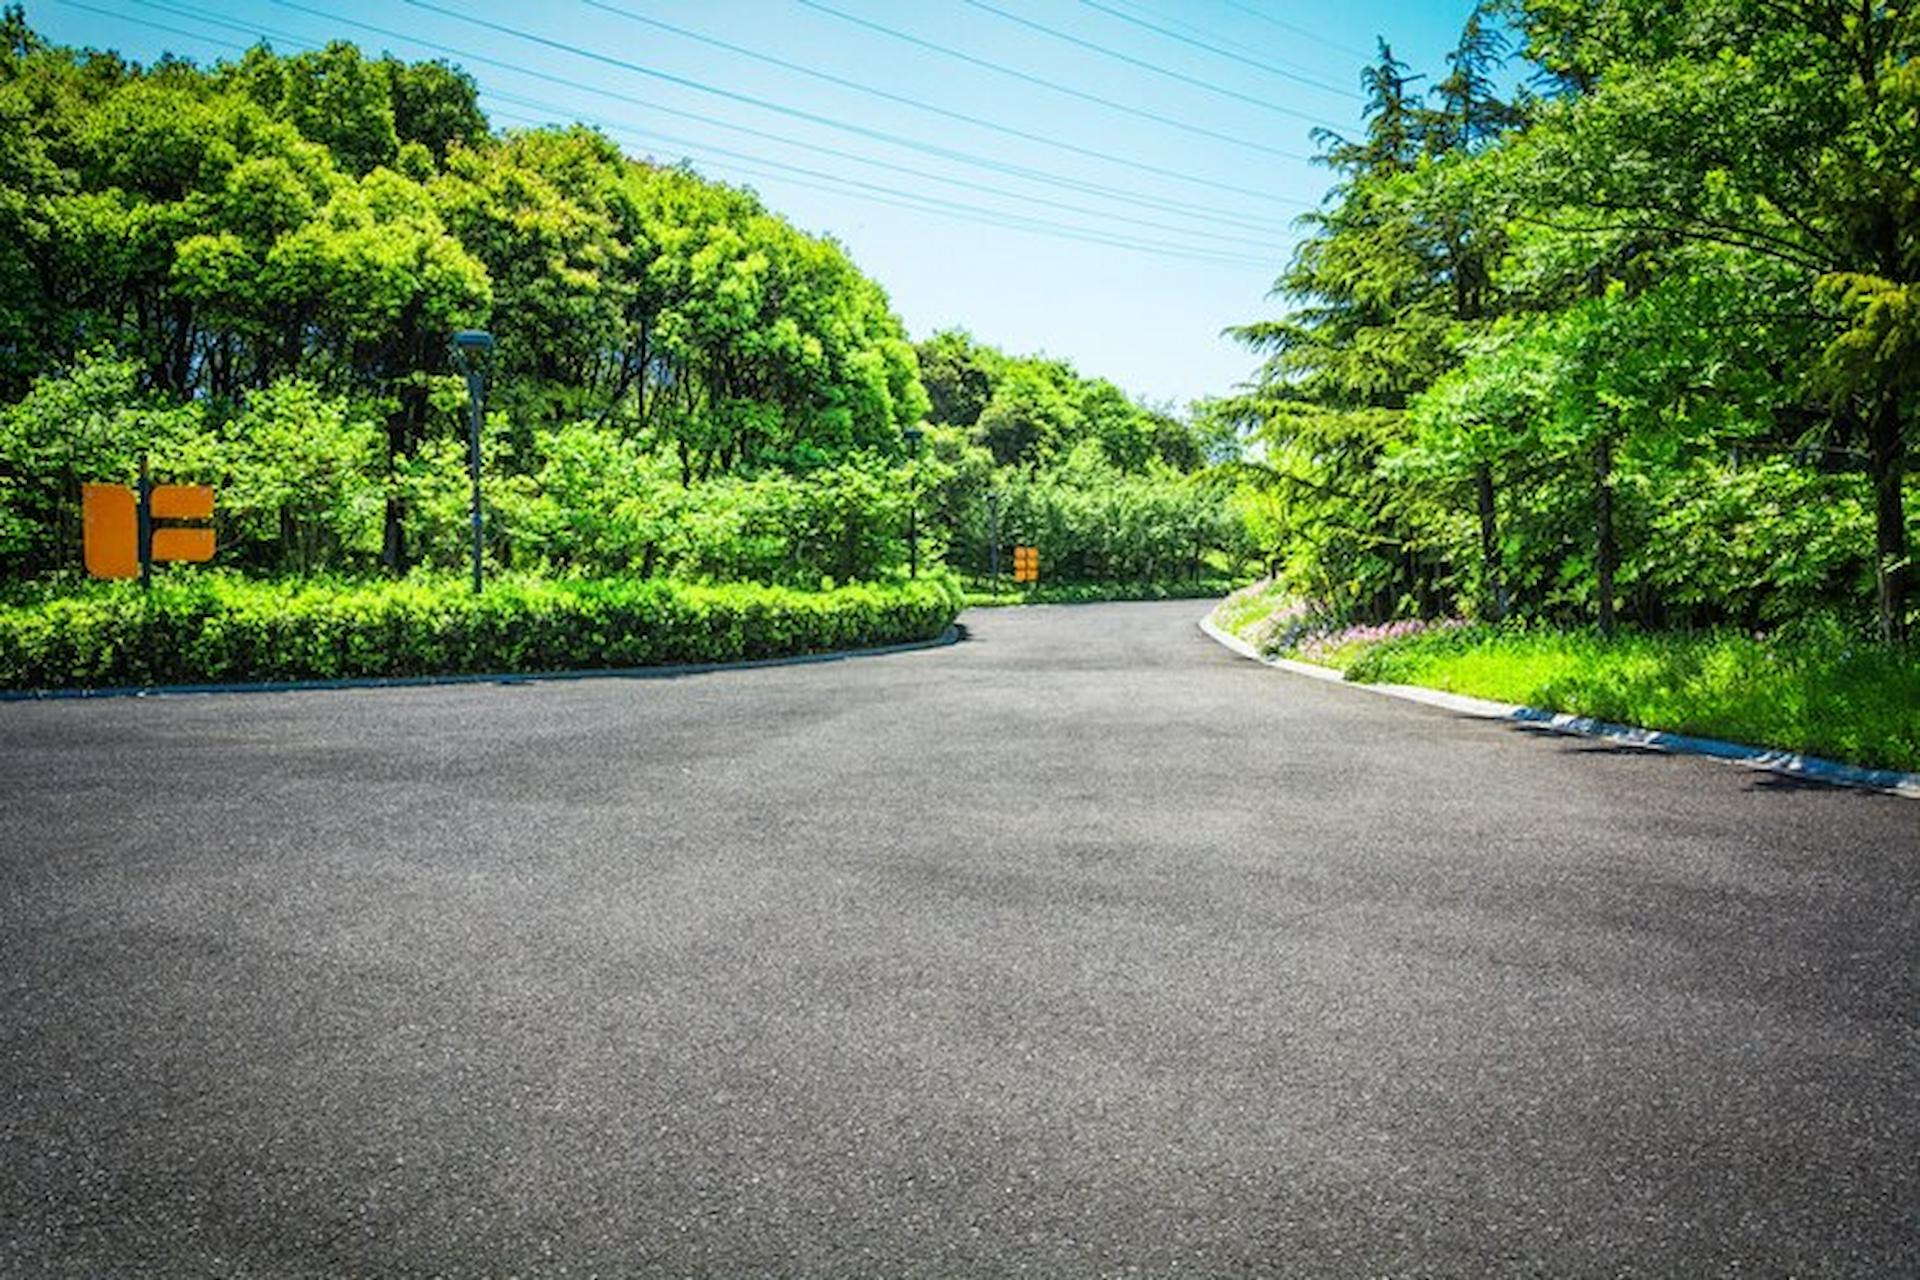 Concrete Driveways: Pros and Cons Every Homeowner Should Know